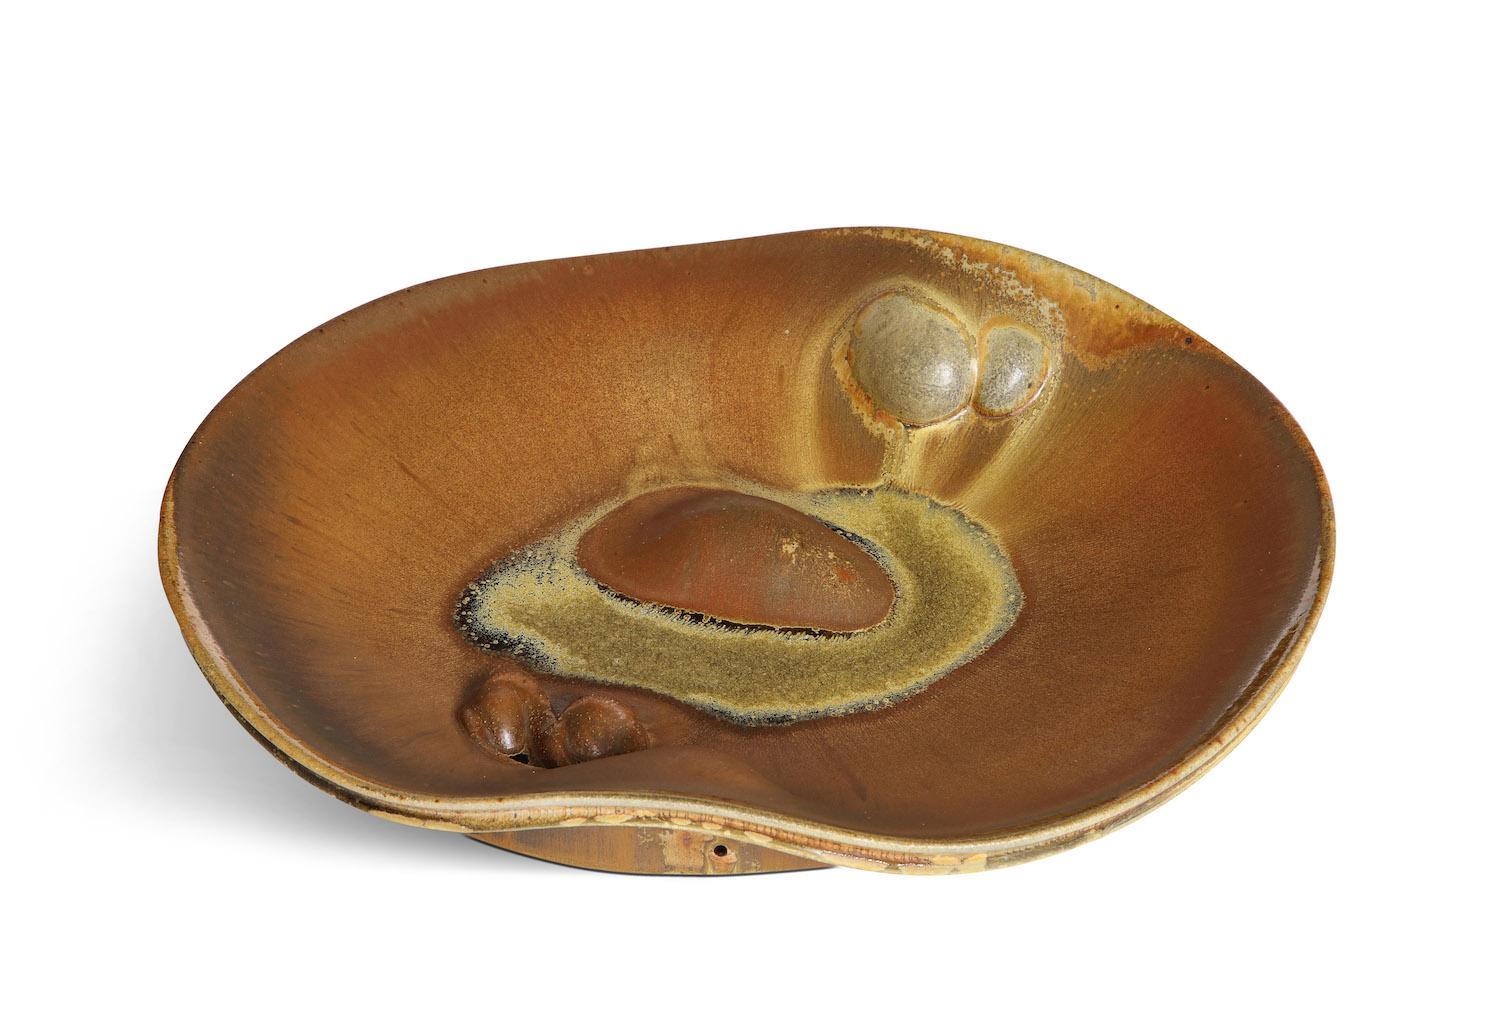 Contemporary Platter #1702 by Chris Gustin